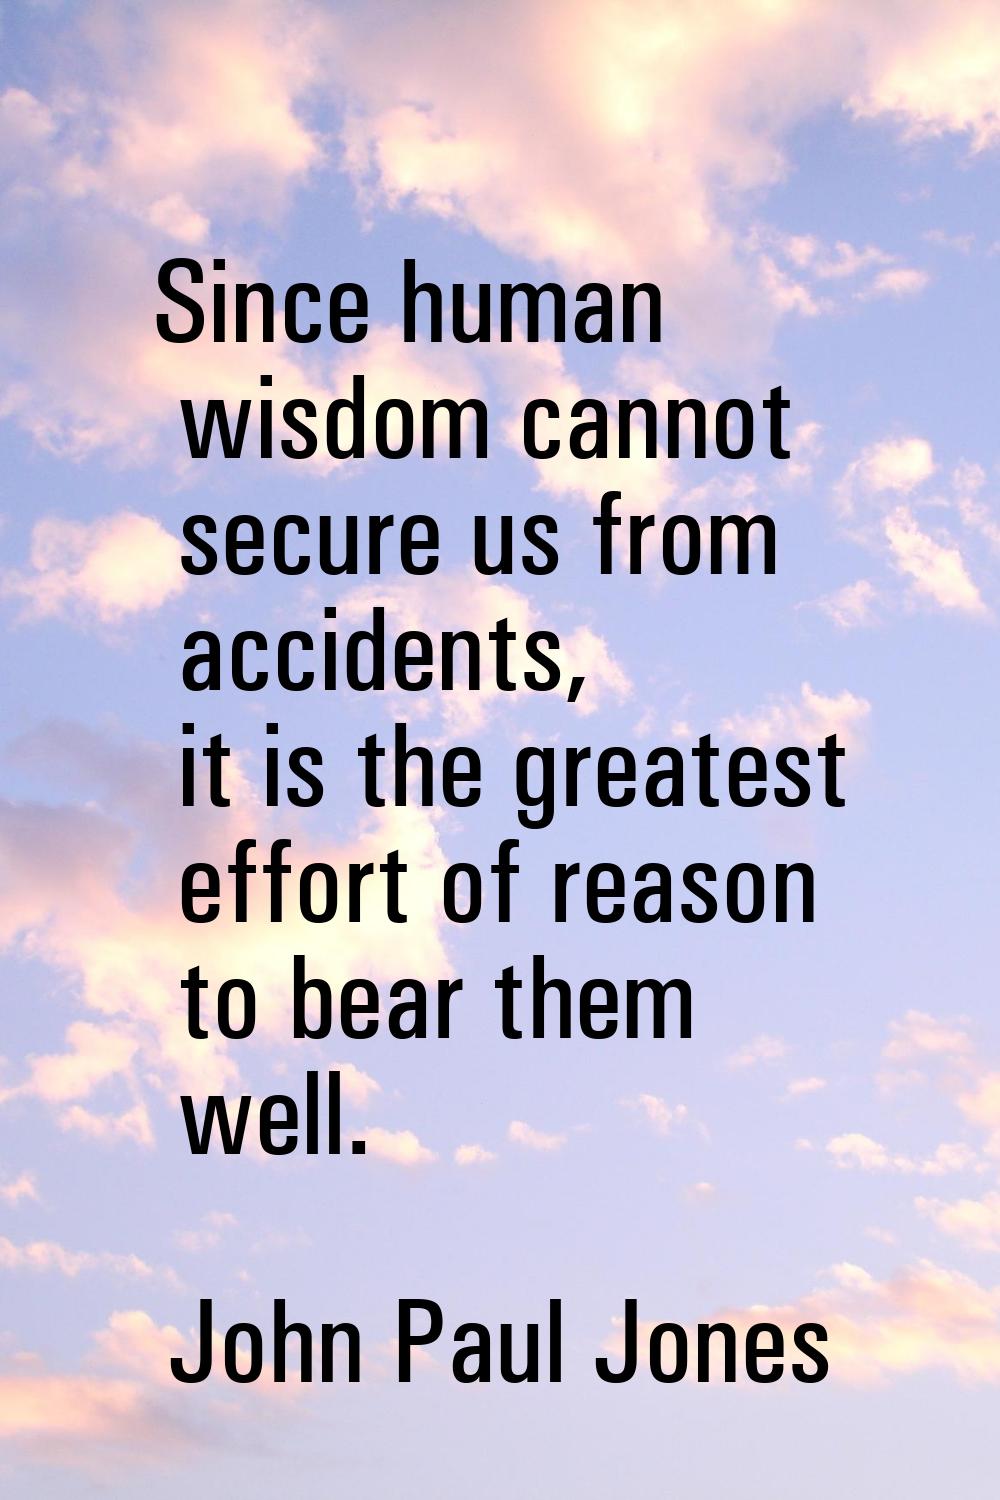 Since human wisdom cannot secure us from accidents, it is the greatest effort of reason to bear the